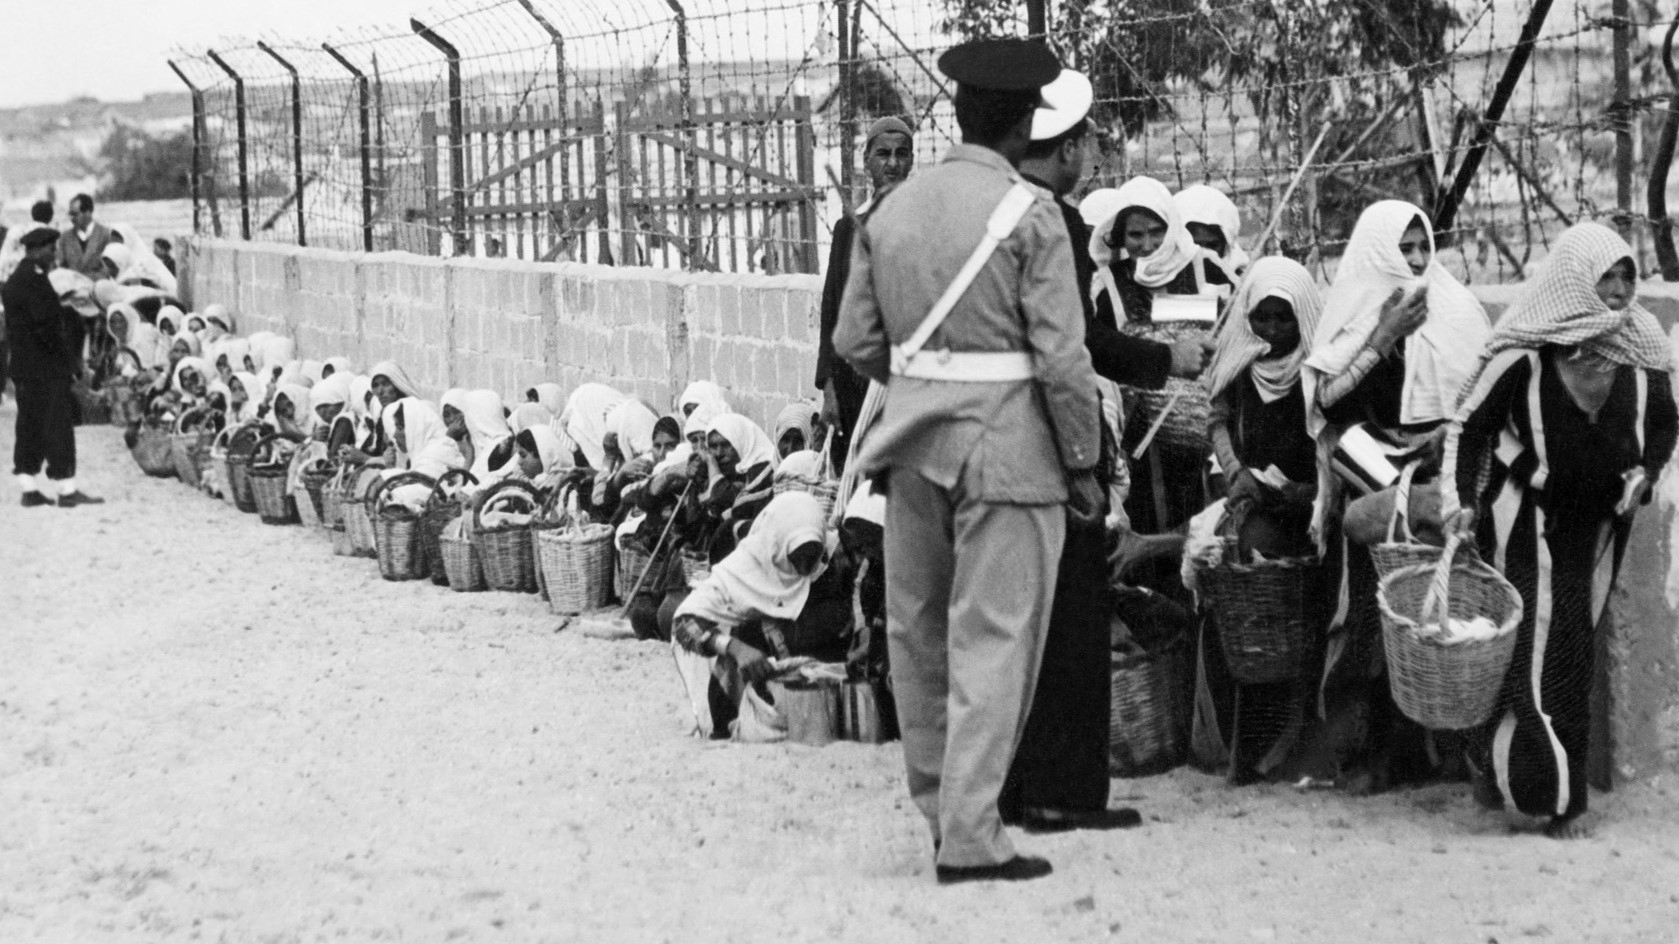 Palestinian refugees queue for food distributed by the Unrwa (UN Relief and Work Agency for Palestinian refugees) at a camp in Gaza 09 November 1956 (Rene Jarland/AFP)